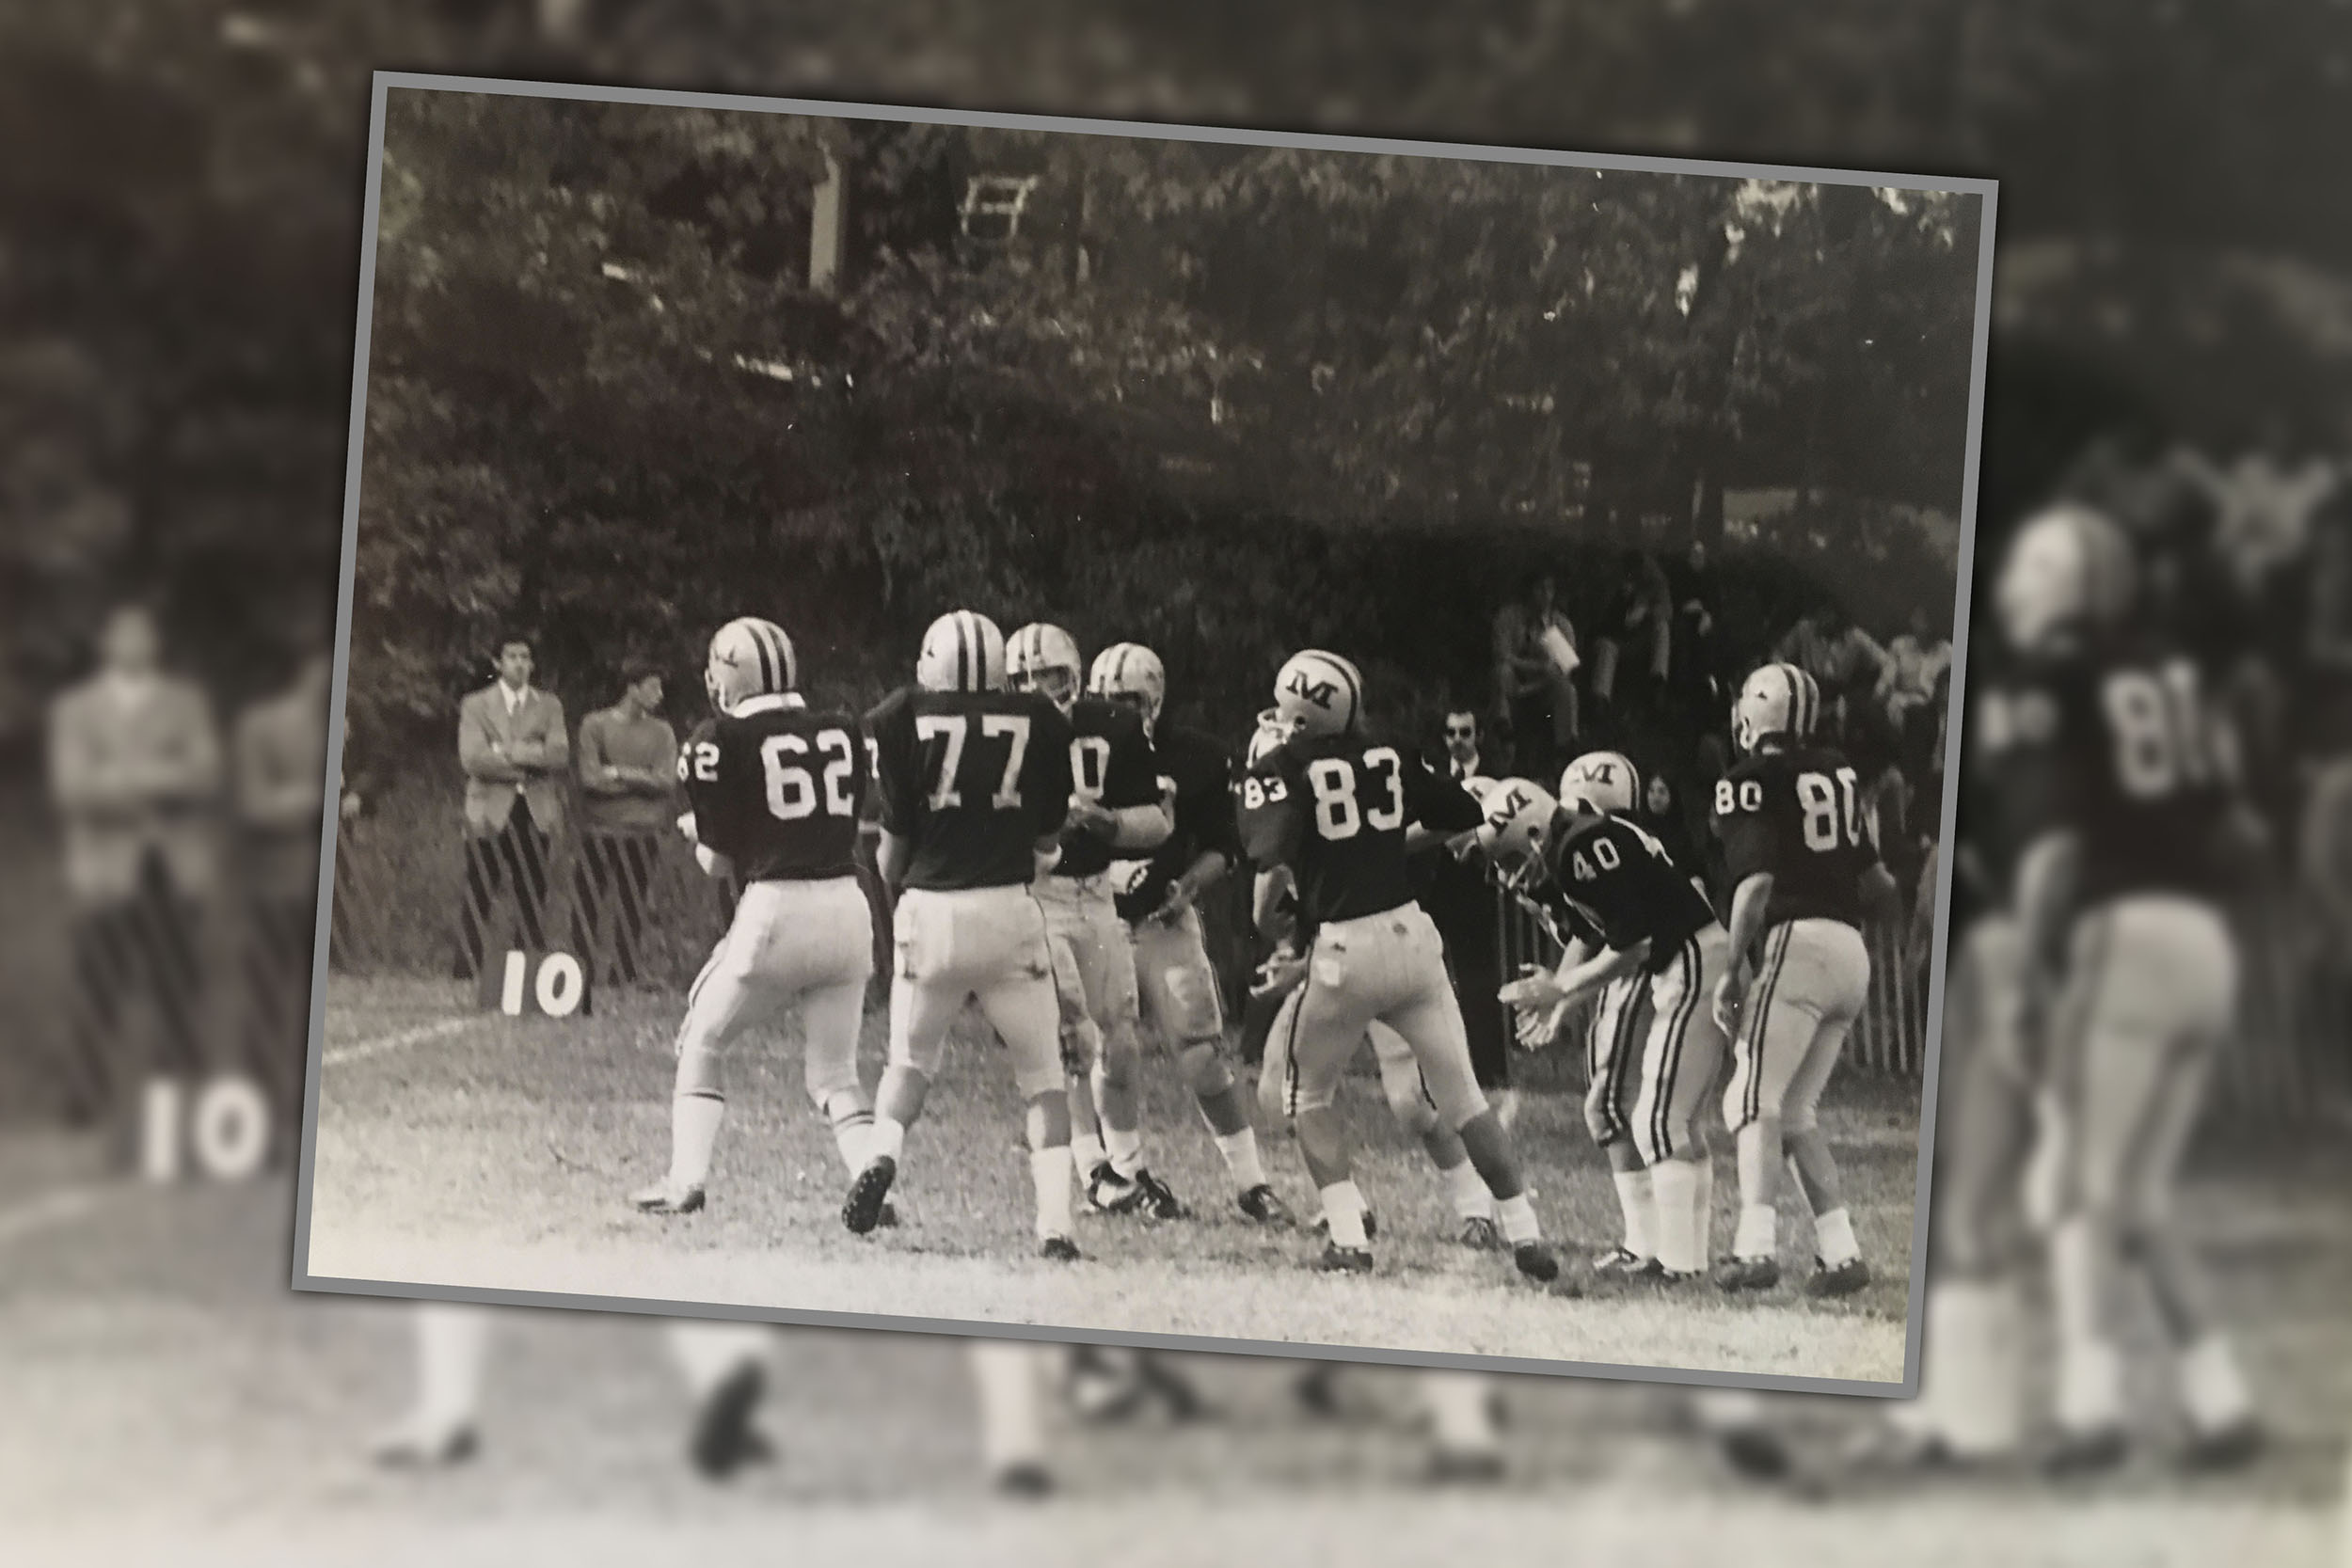 REVIEW OF THE 1972 UNDEFEATED FOOTBALL FRIARS